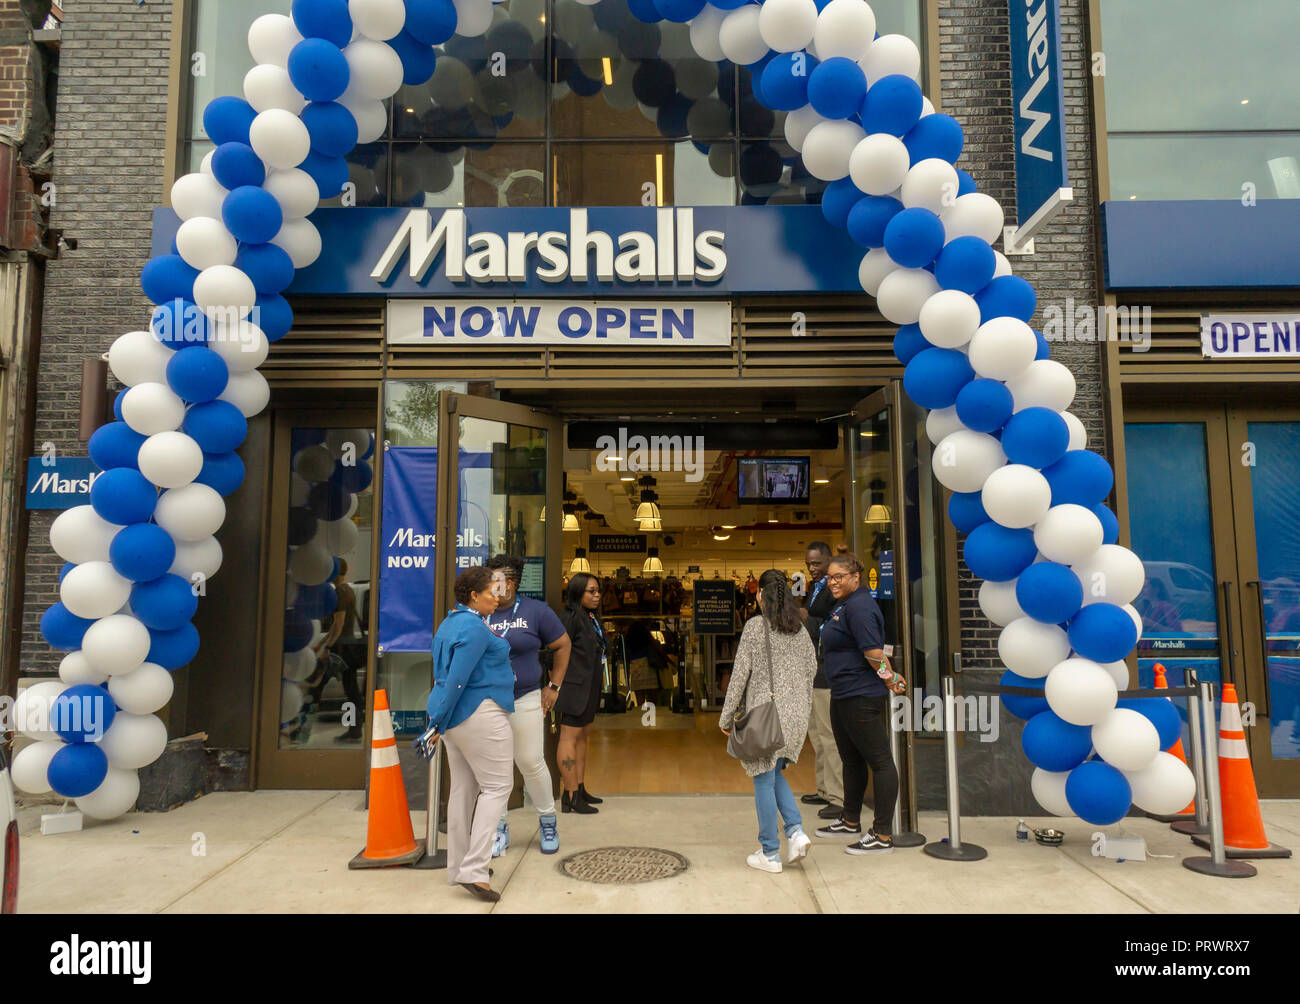 New York, USA. 4th October, 2018. Customers outside the brand new off-price Marshalls store in the Lower East Side neighborhood of in New York during it's grand opening on Thursday, October 4, 2018. Marshalls is a brand of the TJX Companies, parent of Marshalls, T. J. Maxx, HomeGoods and other brands. TJX Companies recently reported comps that grew 6% over year citing increased traffic in its Marmaxx division (Marshalls, TX Maxx). (Â© Richard B. Levine) Credit: Richard Levine/Alamy Live News Stock Photo